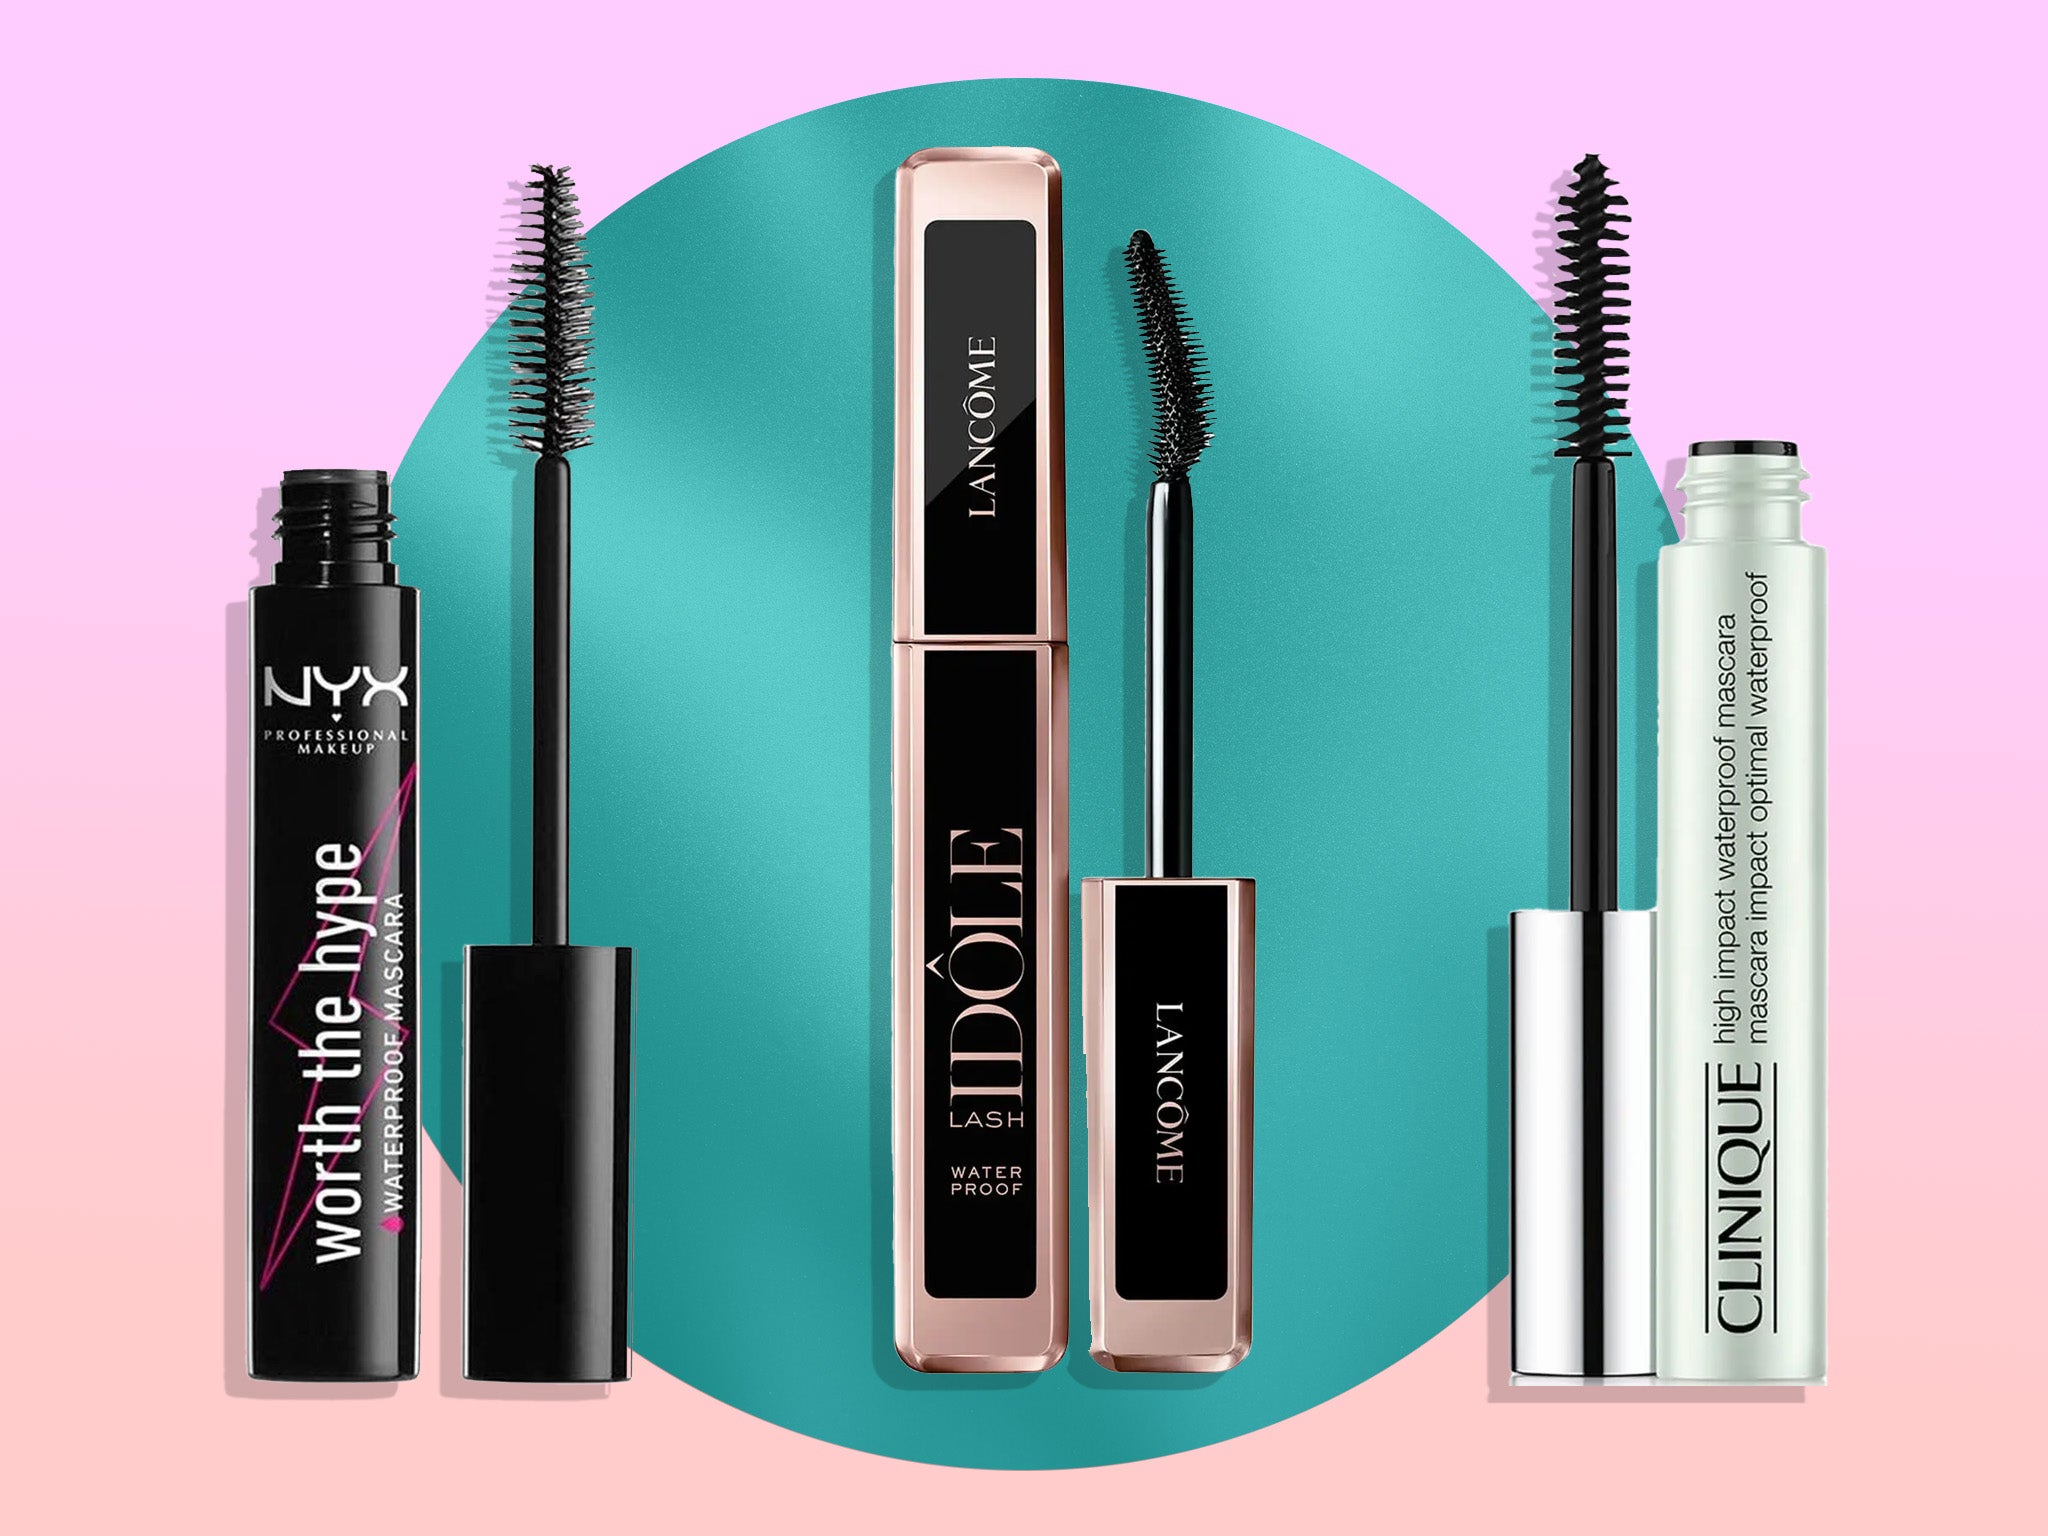 waterproof mascara 2022: Smudge proof formulas for volume, | The Independent